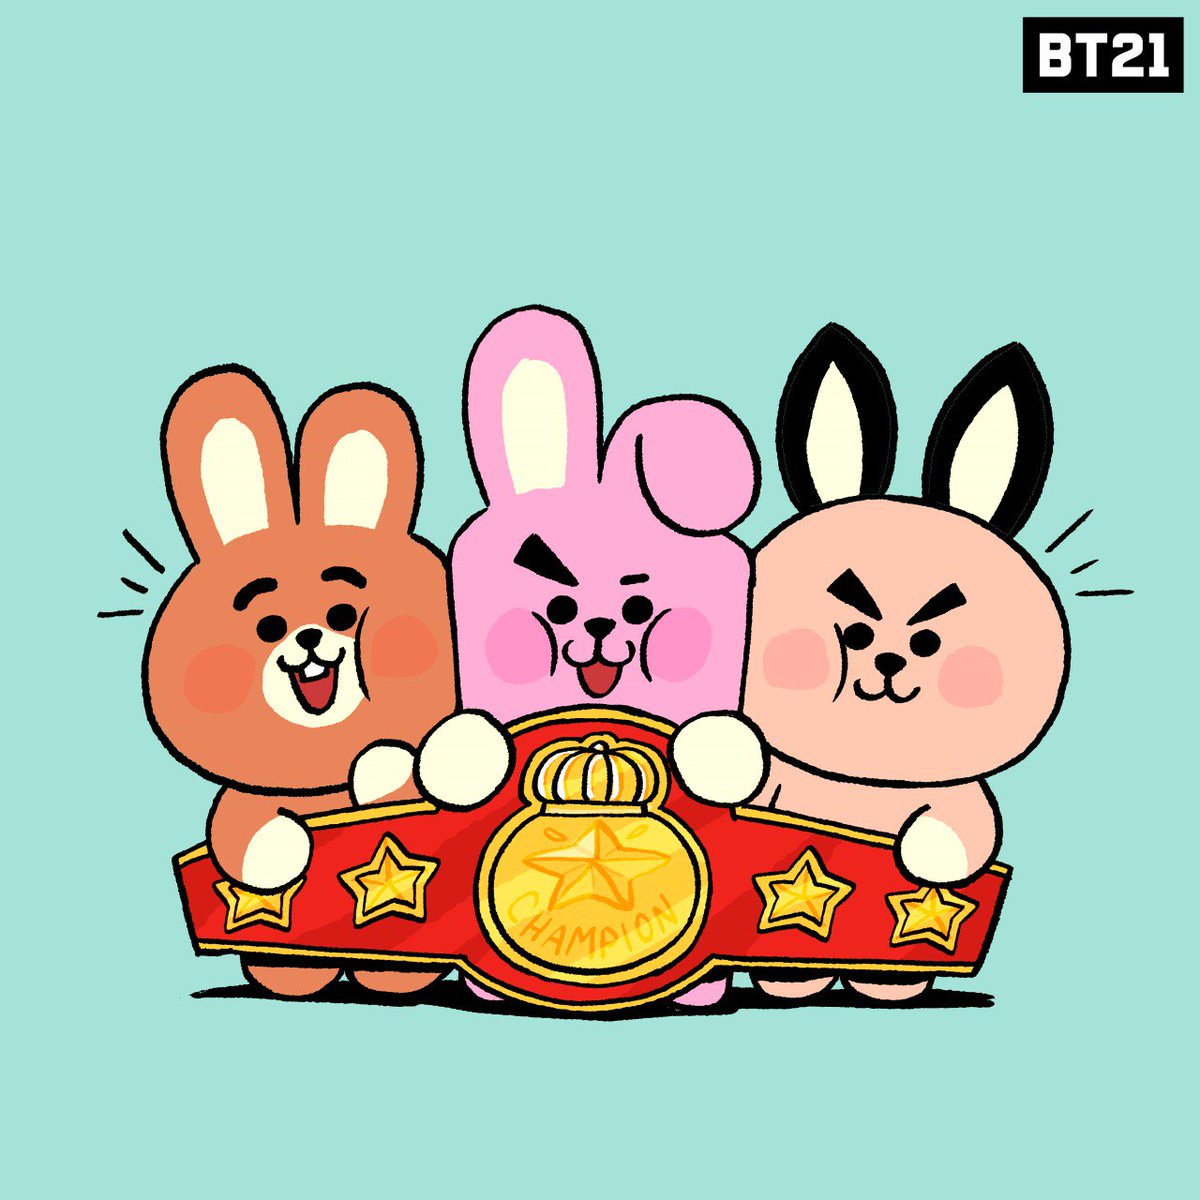 Quick! 'fore he gets back! 📸

#SayCheese #uhoh #COOKY #JOOKY #IAN #ChildhoodMemories #C_GUL #BT21_UNIVERSE #BT21